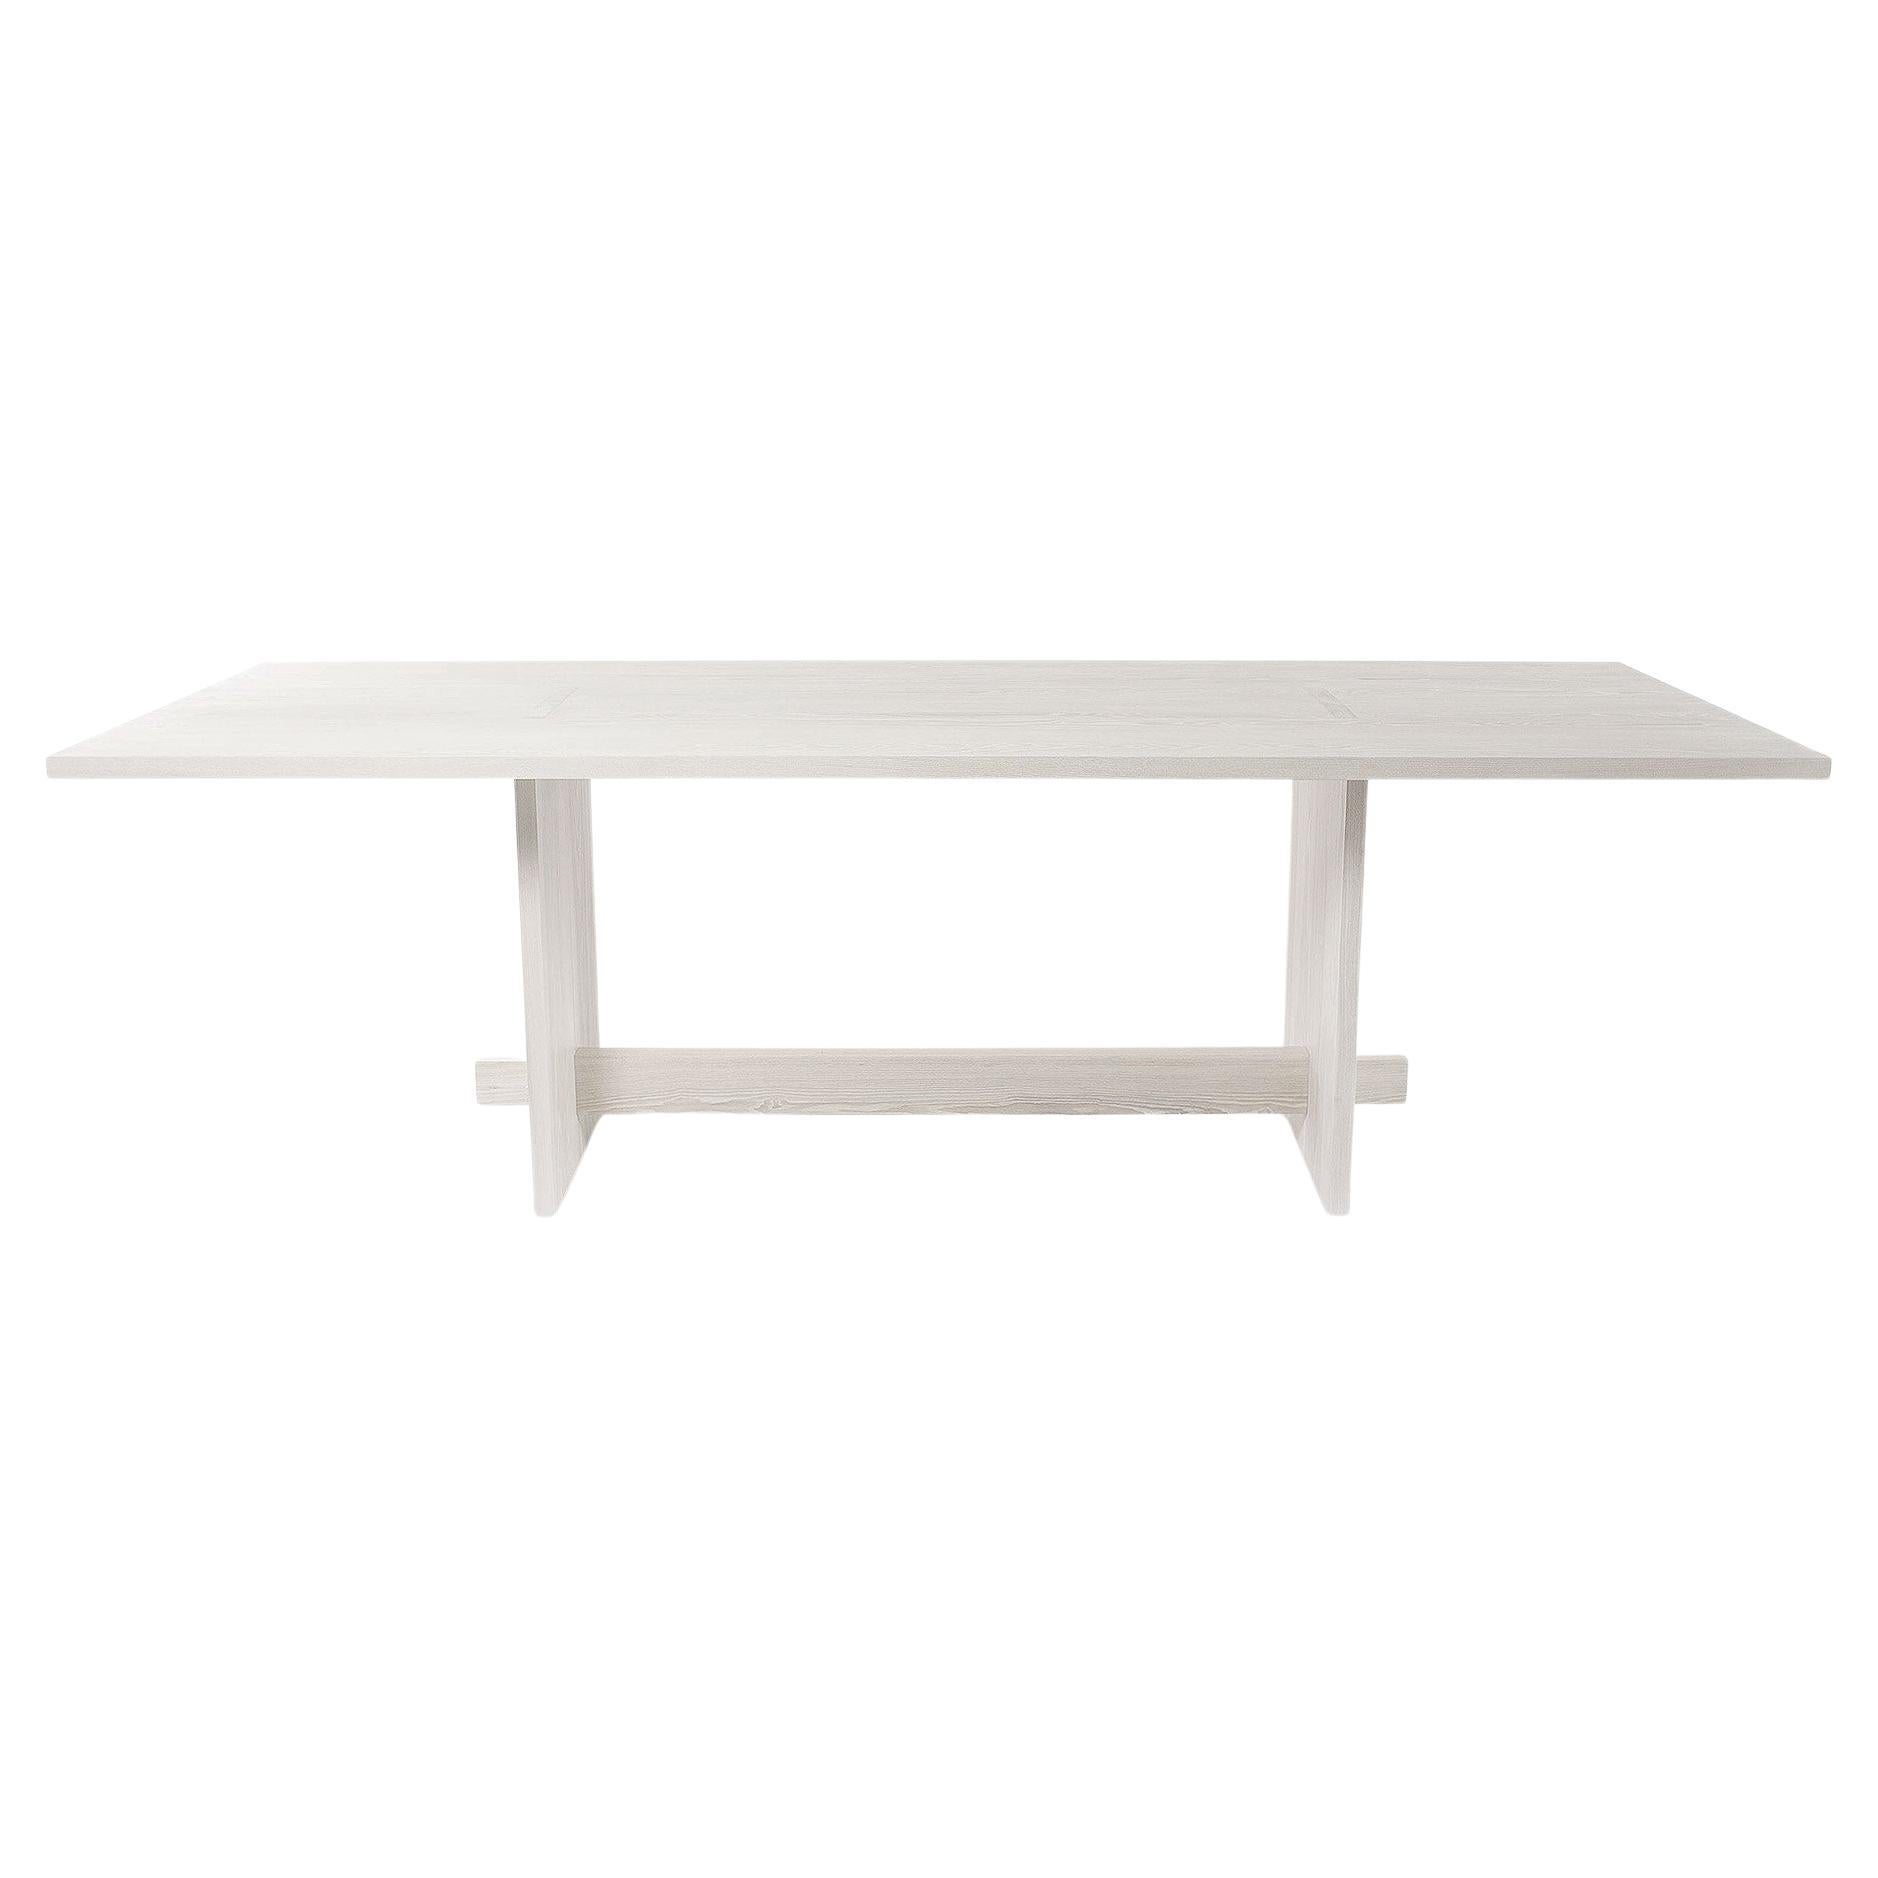 Handcrafted Solid White Ash Himes Dining Table 120"L by Mary Ratcliffe Studio